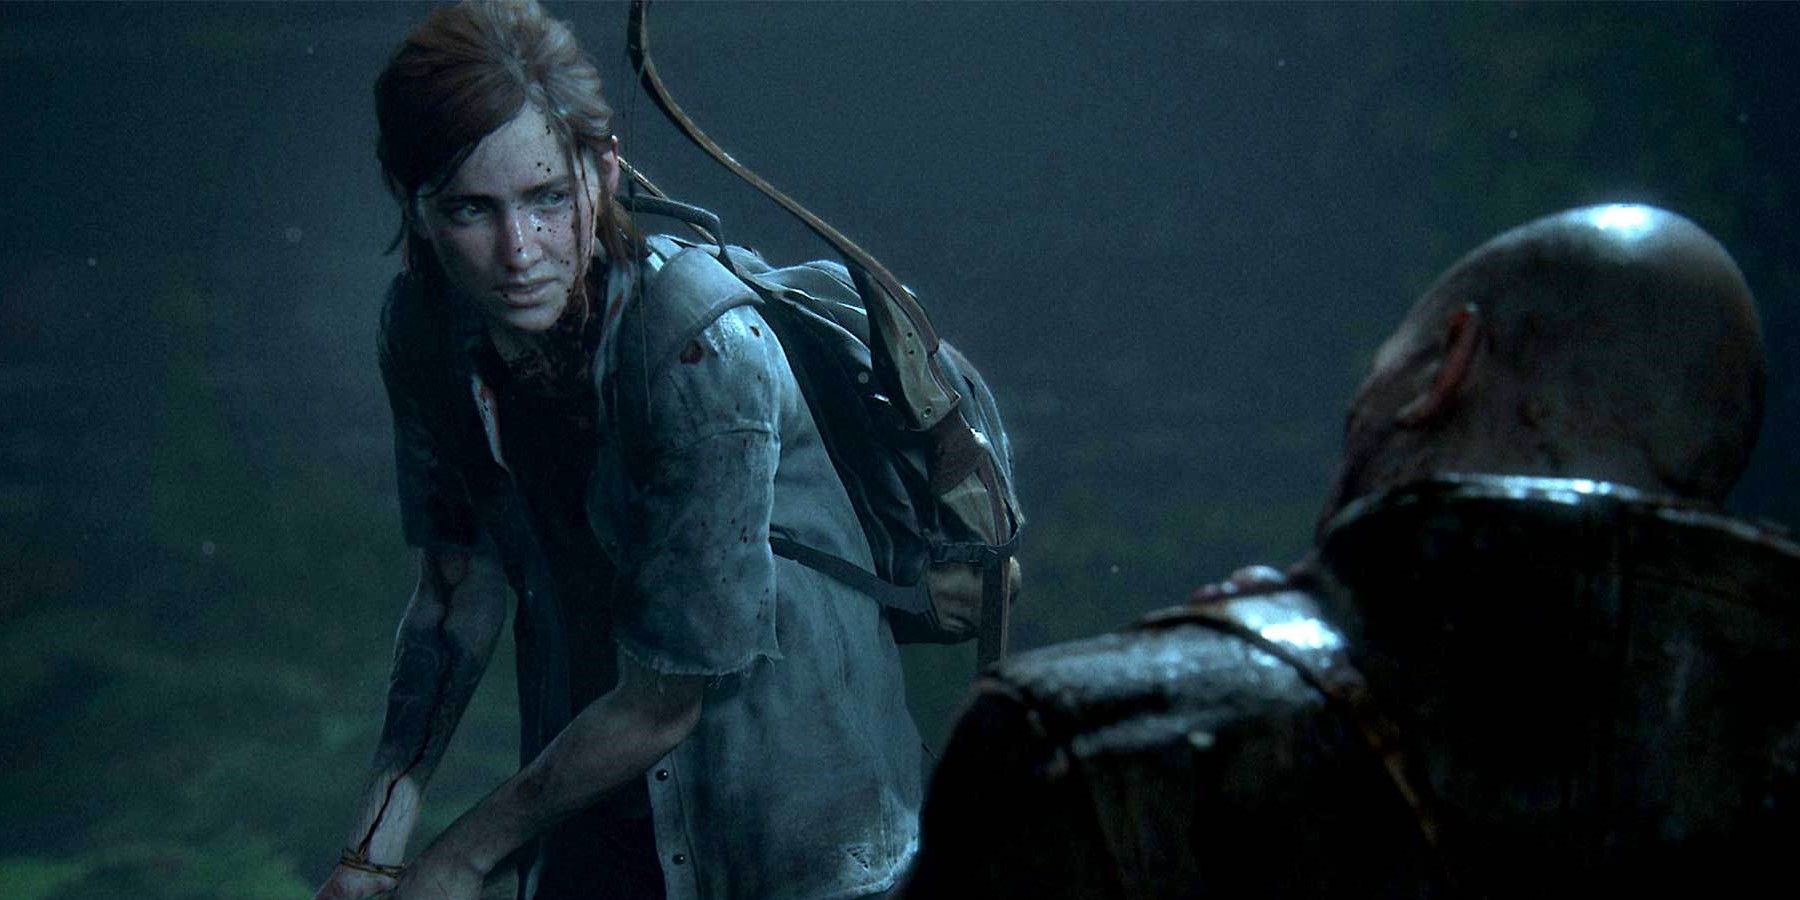 IGN - Naughty Dog's Neil Druckmann encouraged fans on Twitter that while he  can't comment on any new projects currently, there are several cool  things to share at some point in the